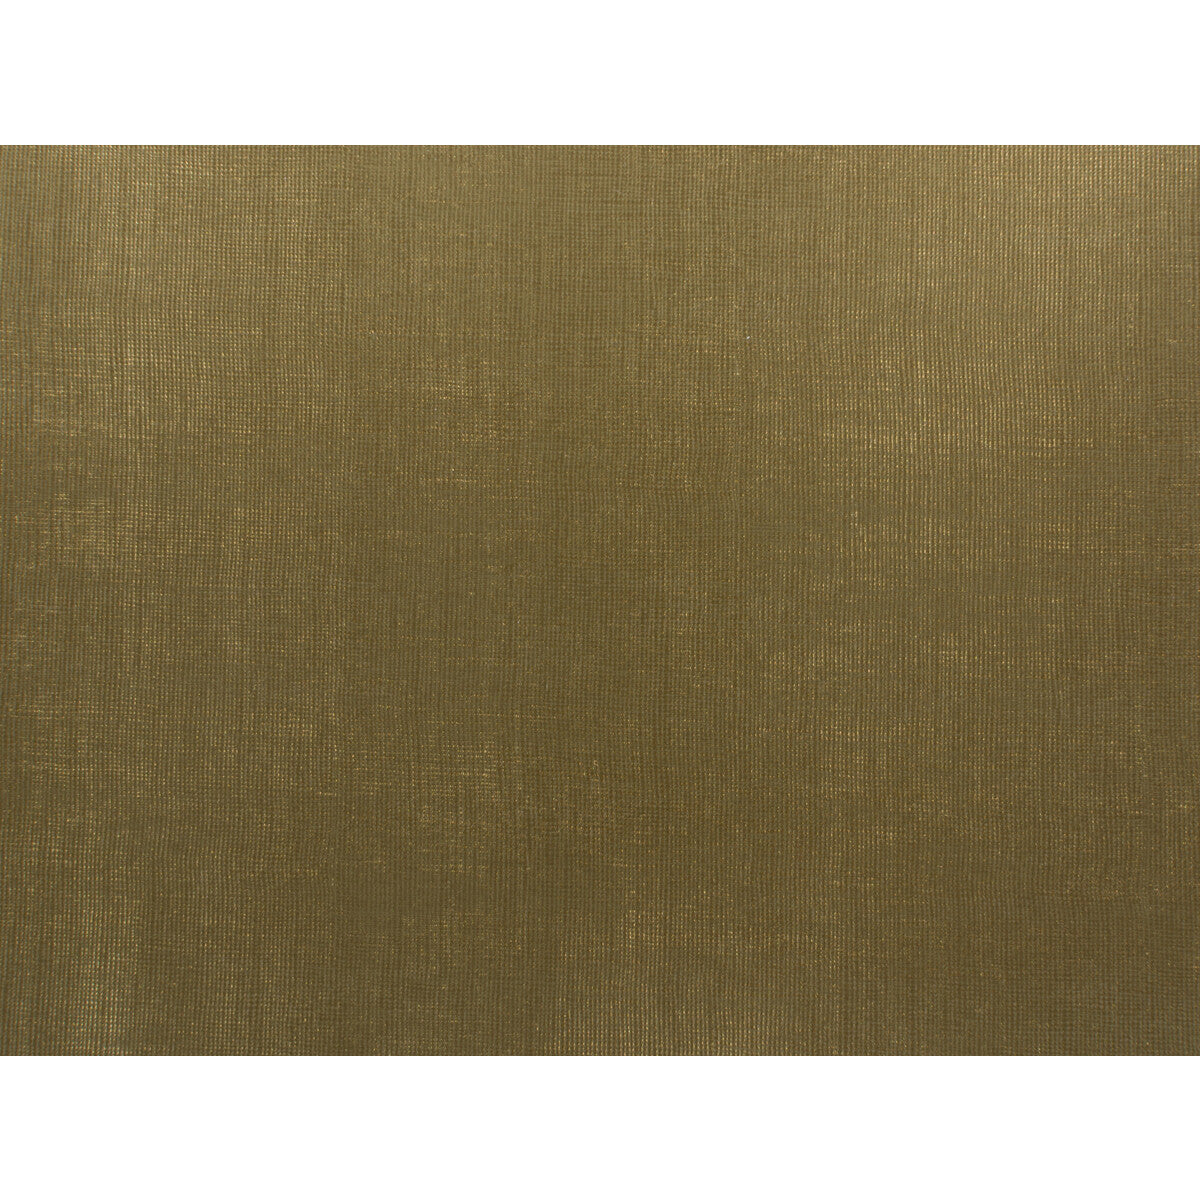 Looker fabric in bronze color - pattern LOOKER.404.0 - by Kravet Contract